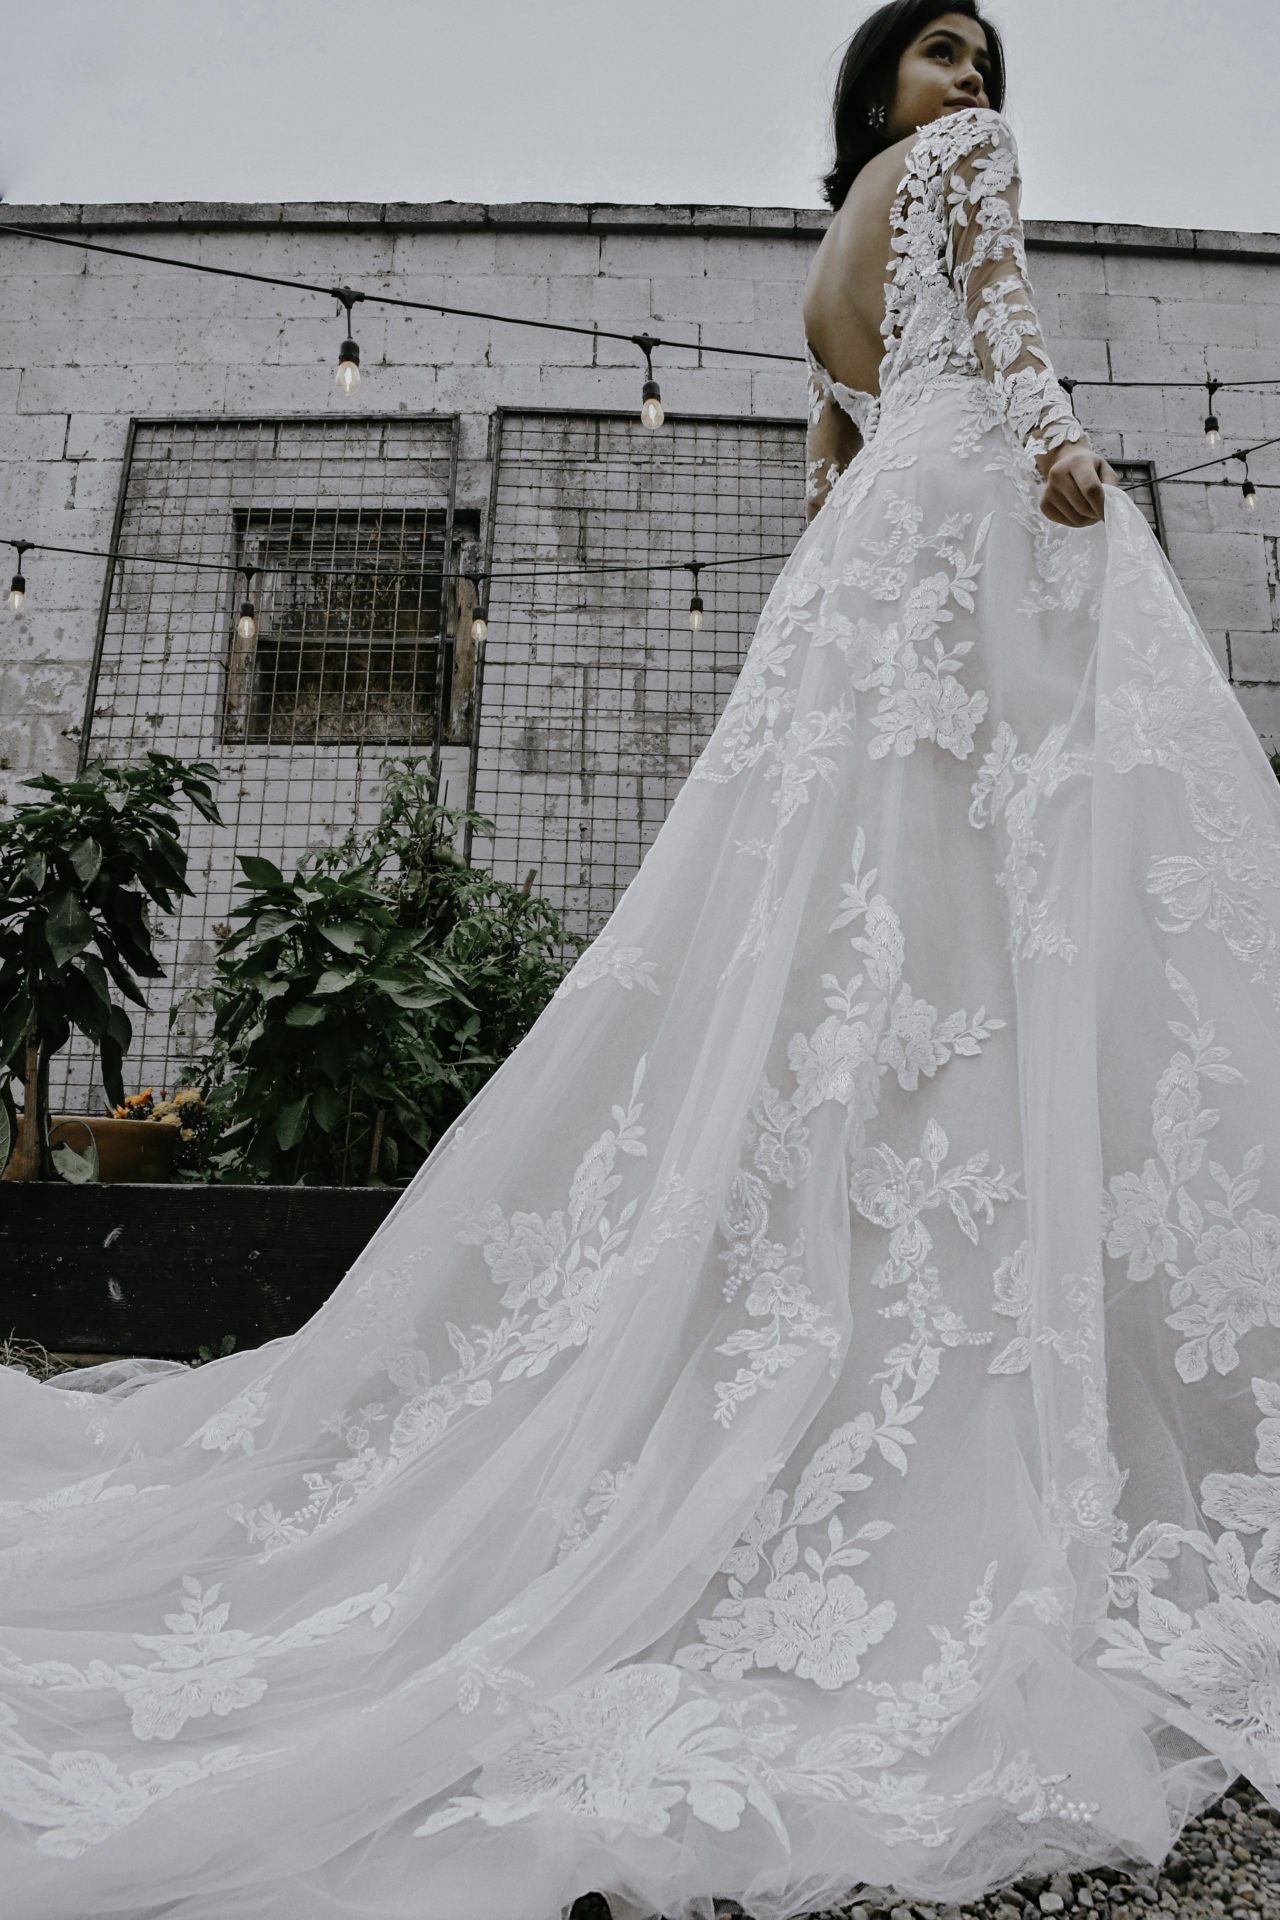 Sheer Floral Lace Wedding Dress with Long Sleeves - Essense of Australia Wedding  Dresses